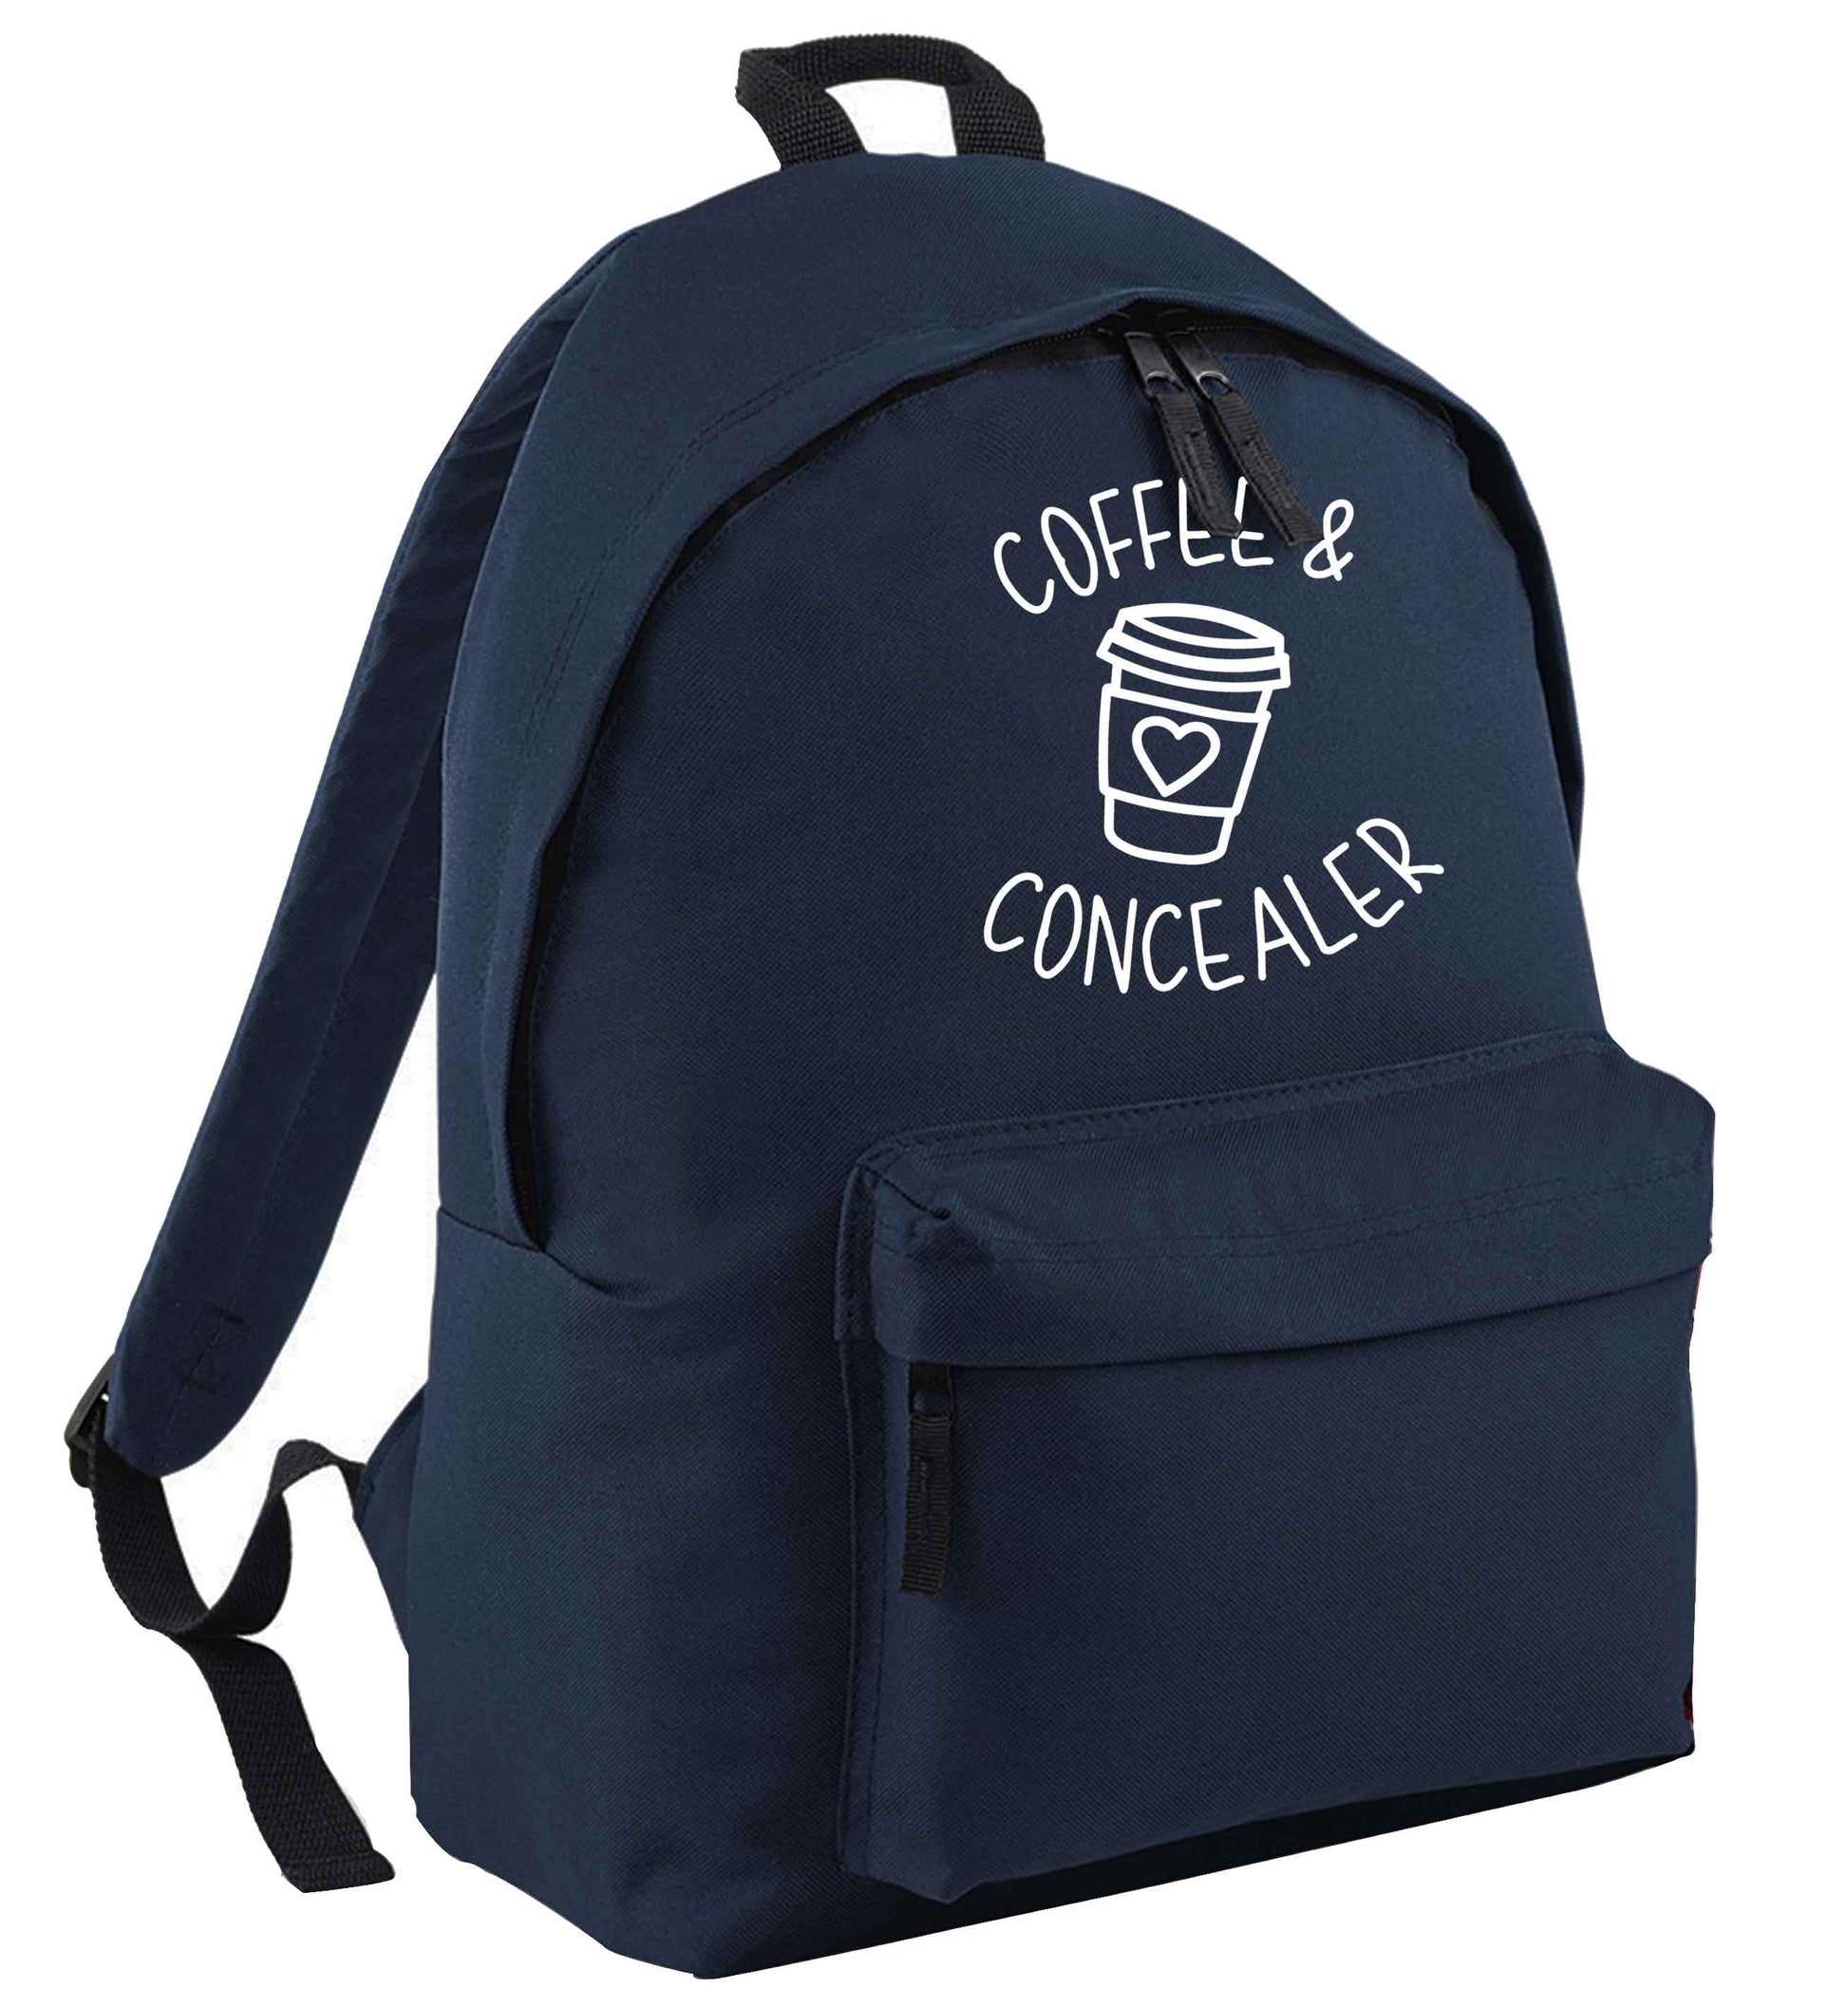 Coffee and concealer navy adults backpack